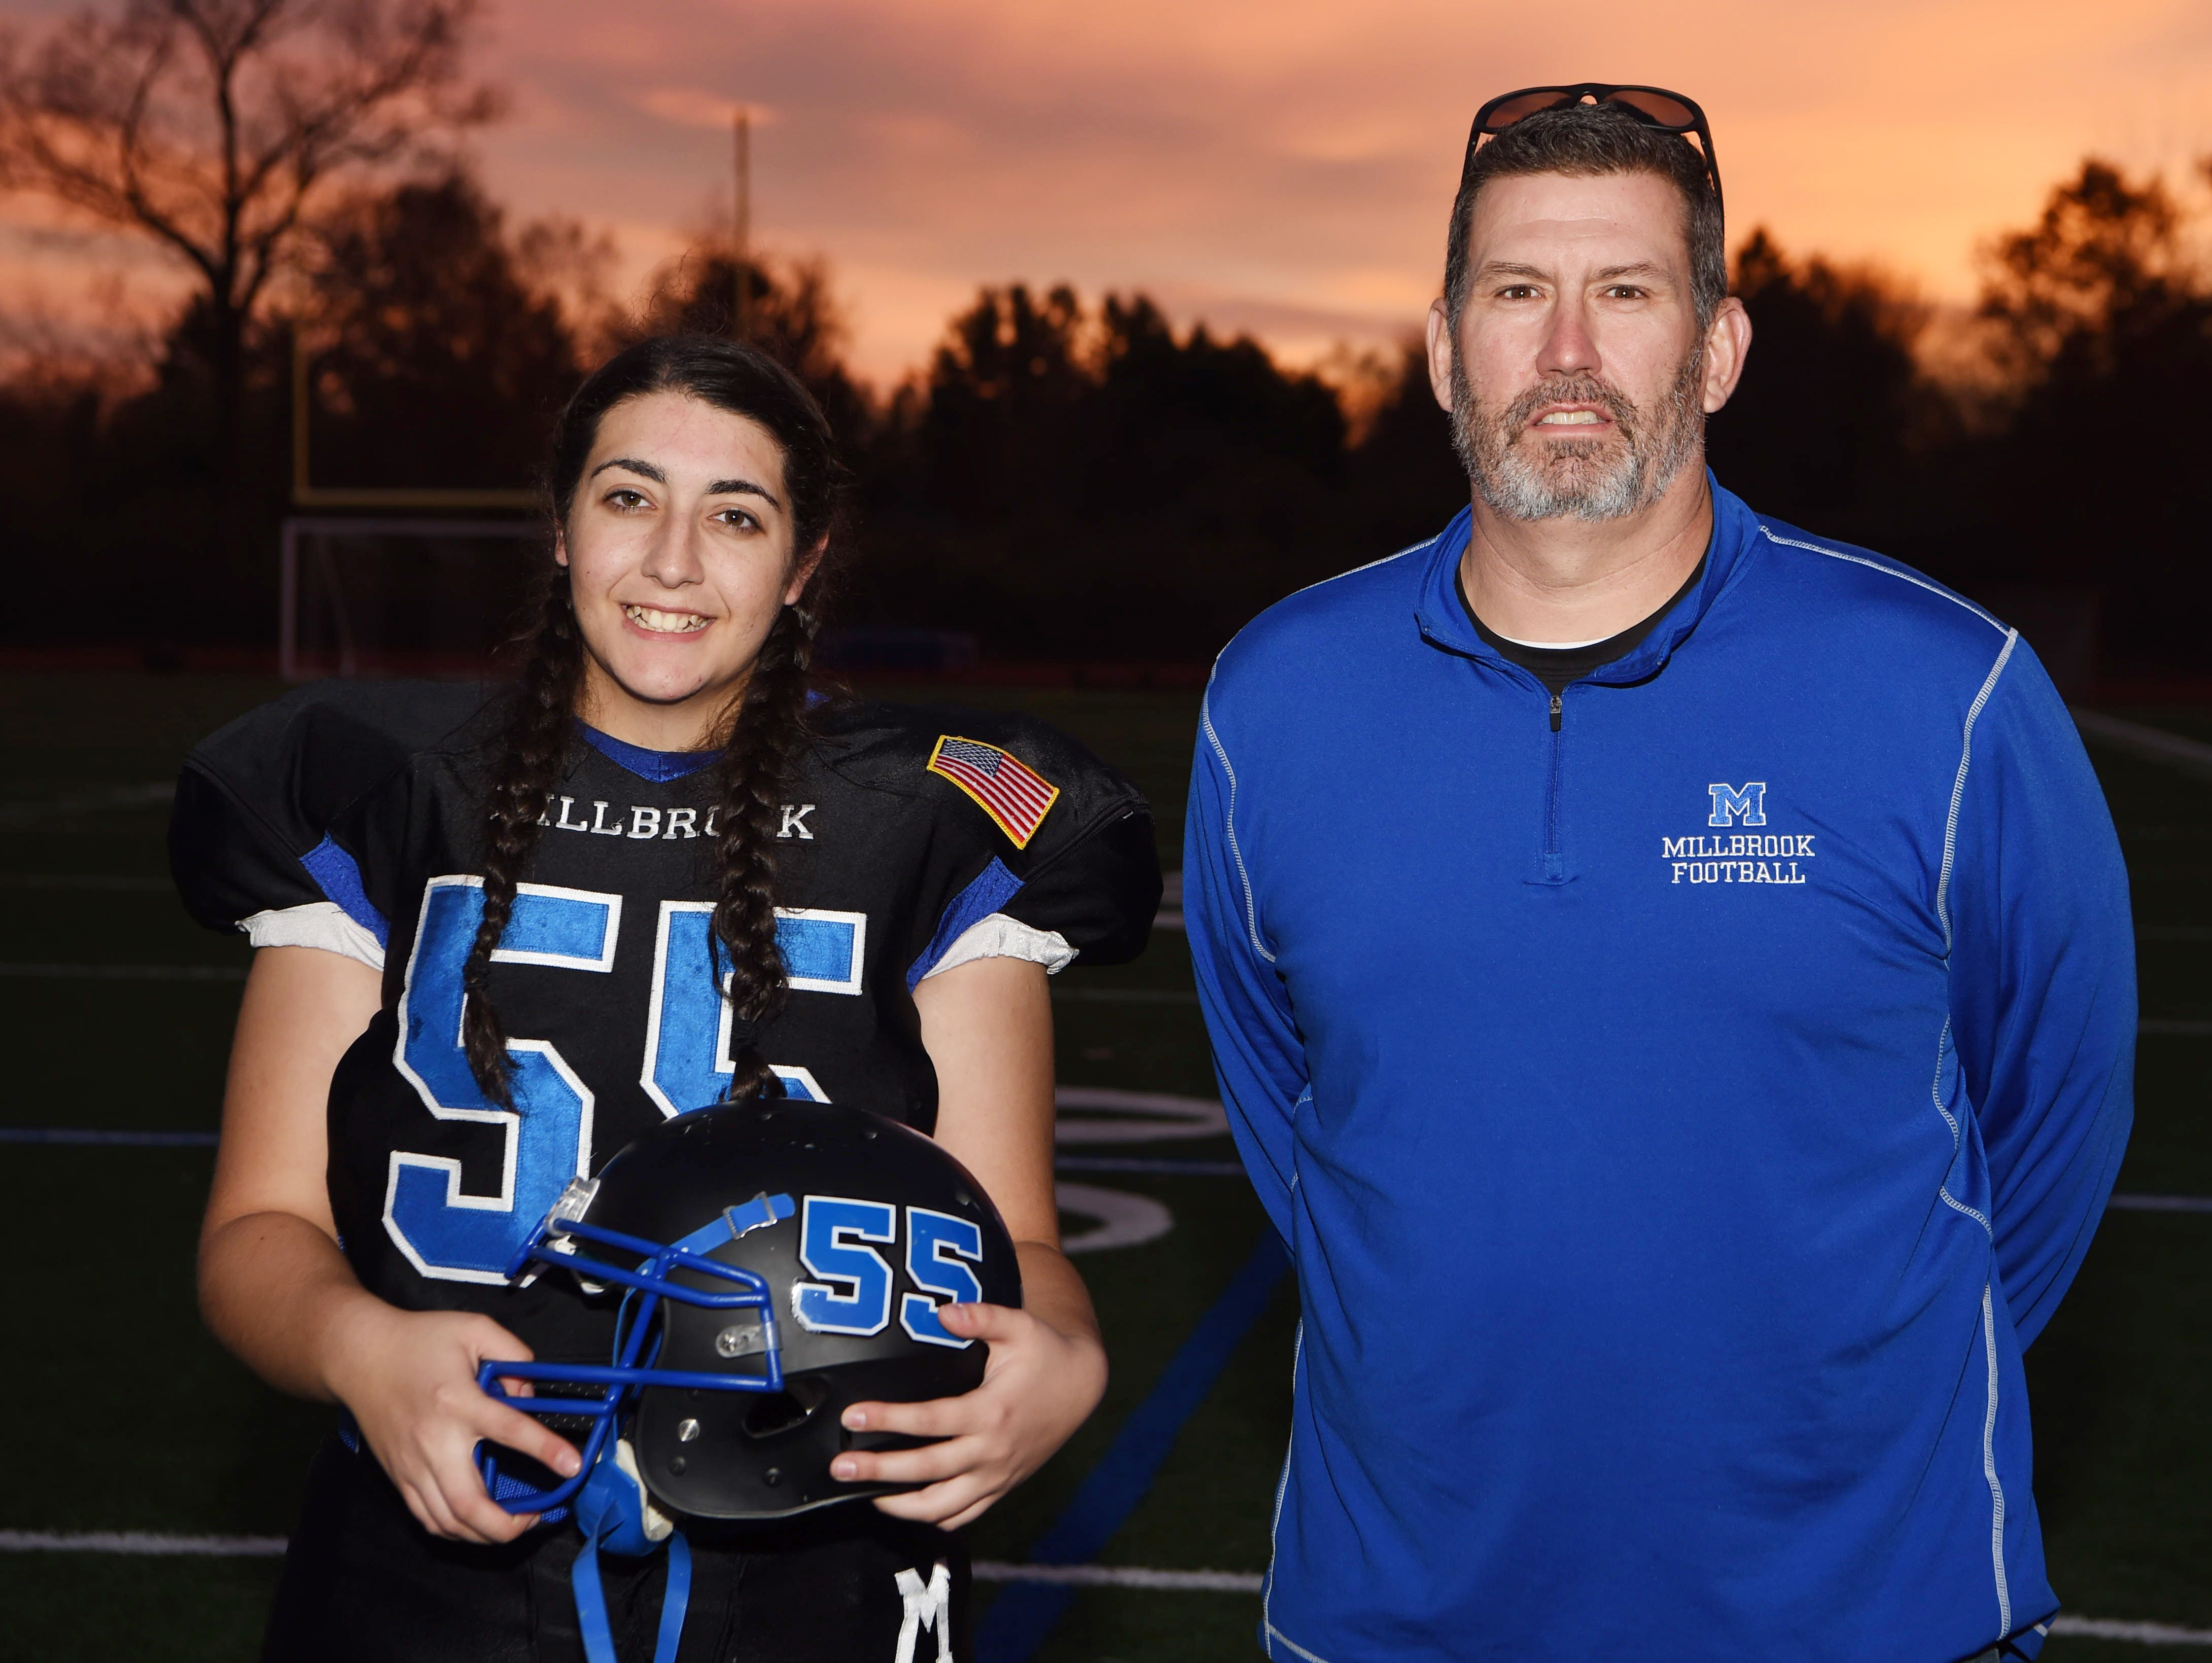 Coryne DeMattio, 15, is sophomore at Millbrook High School and plays defensive line for the football team. She is pictured here with her coach, Sean Keenan.